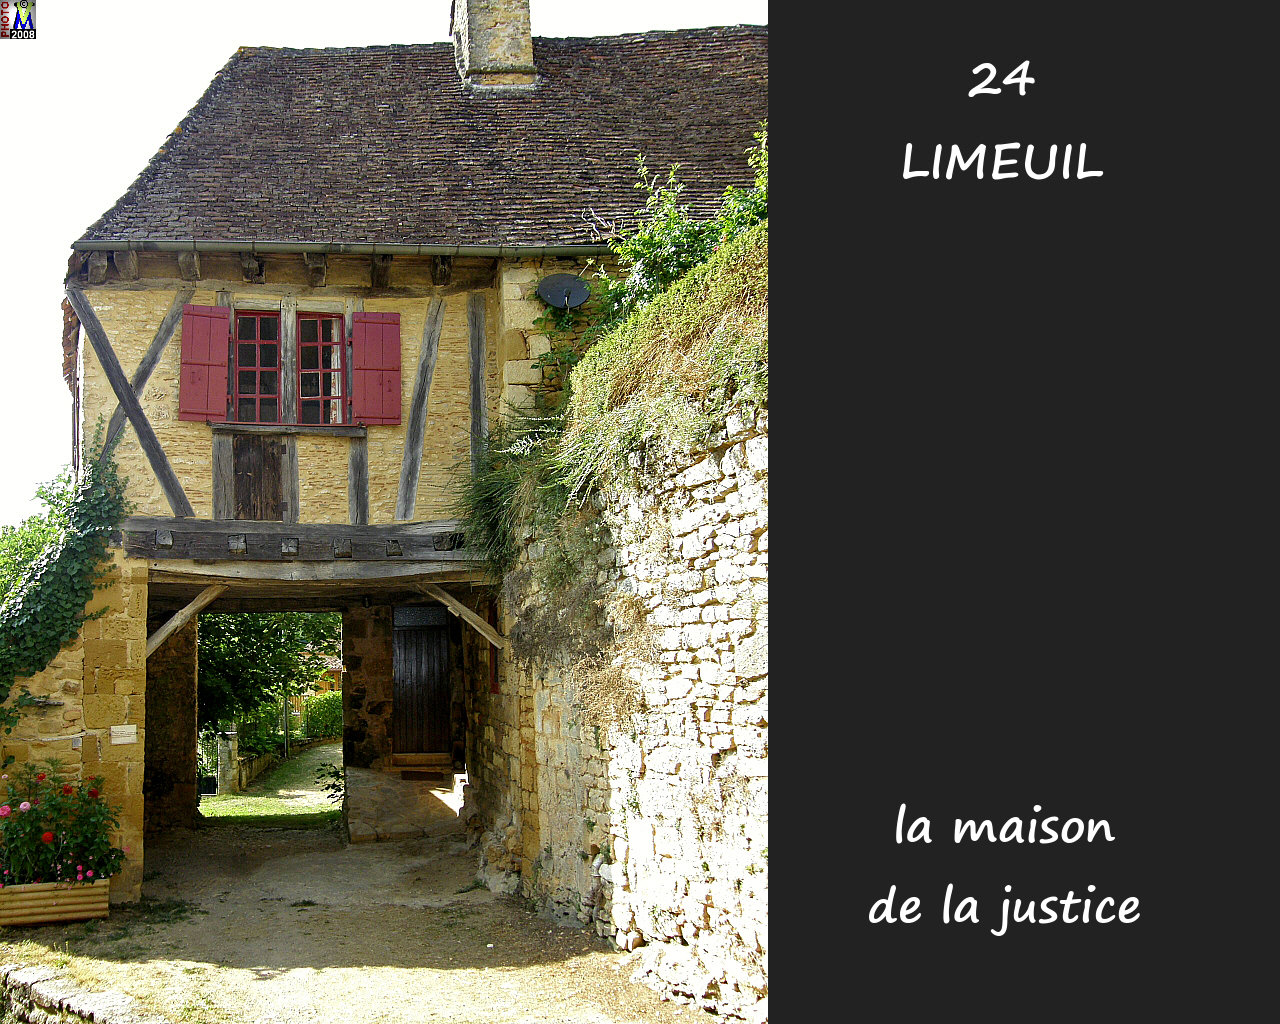 24LIMEUIL_justice_102.jpg